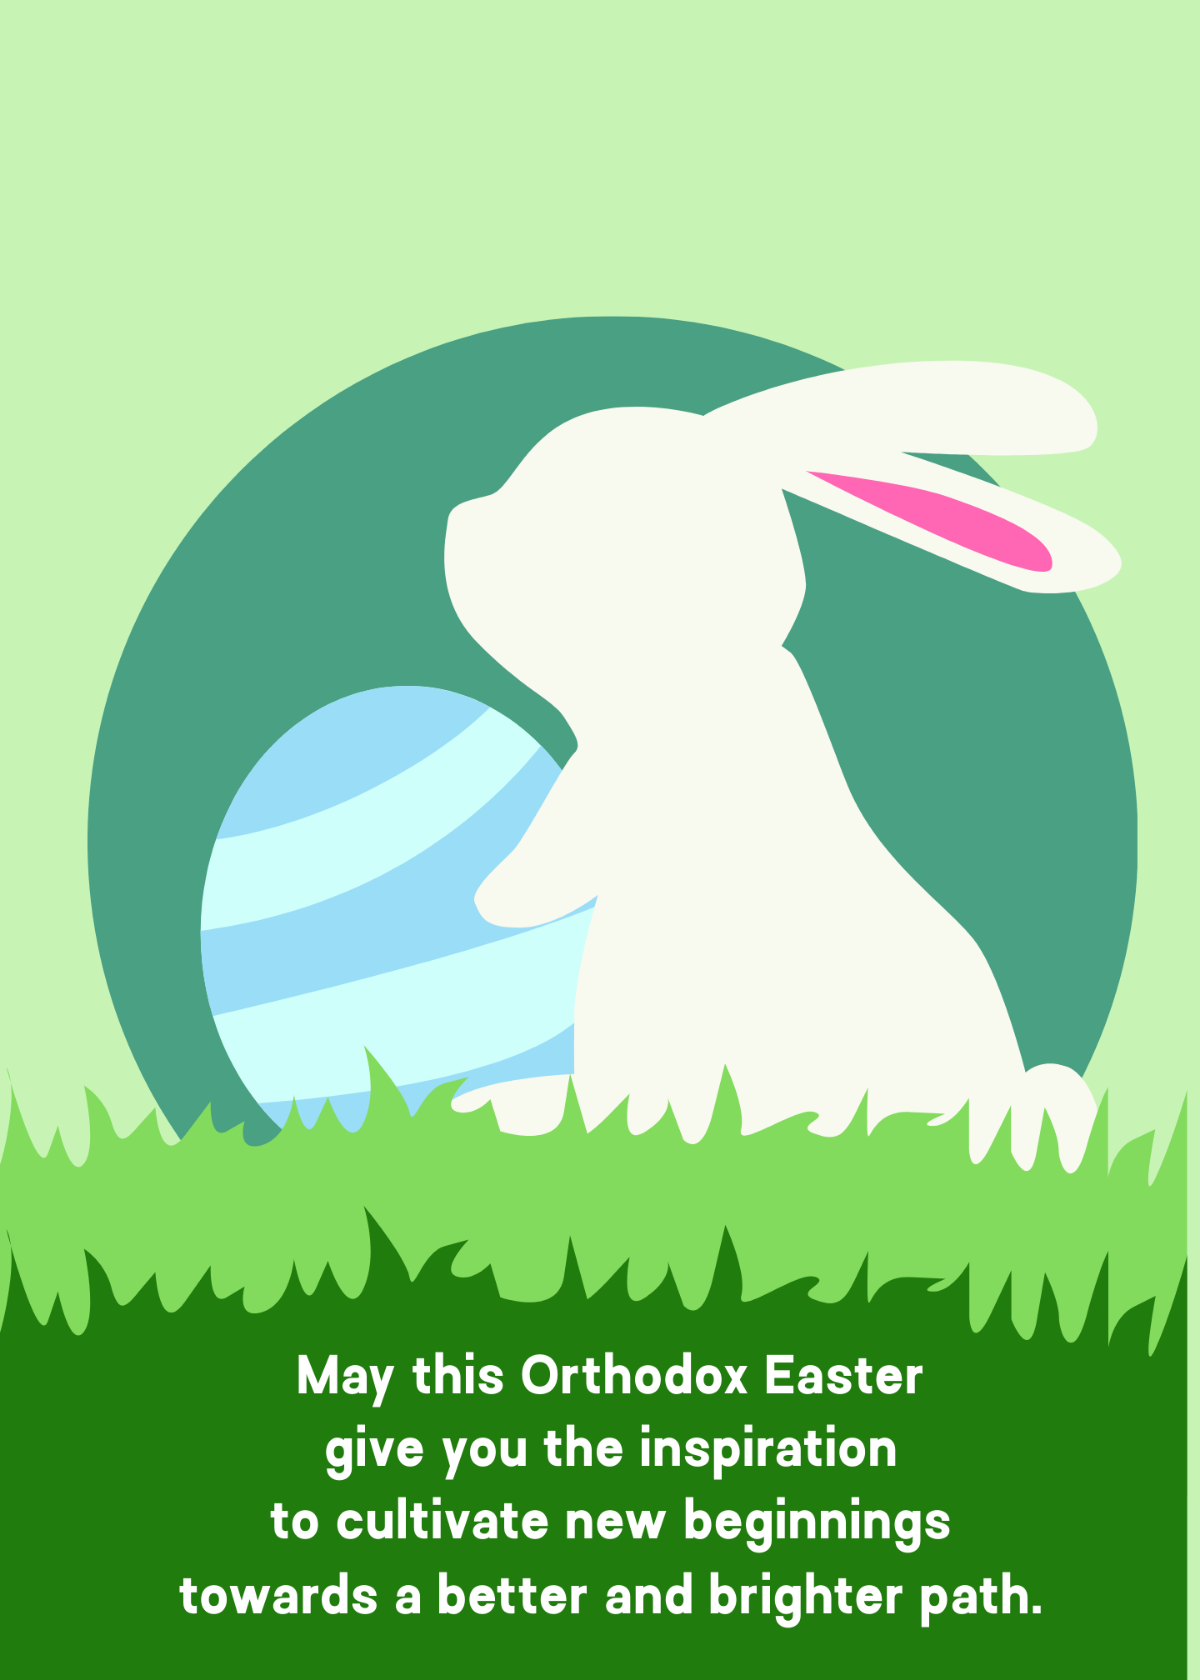 Free Orthodox Easter Wishes Template